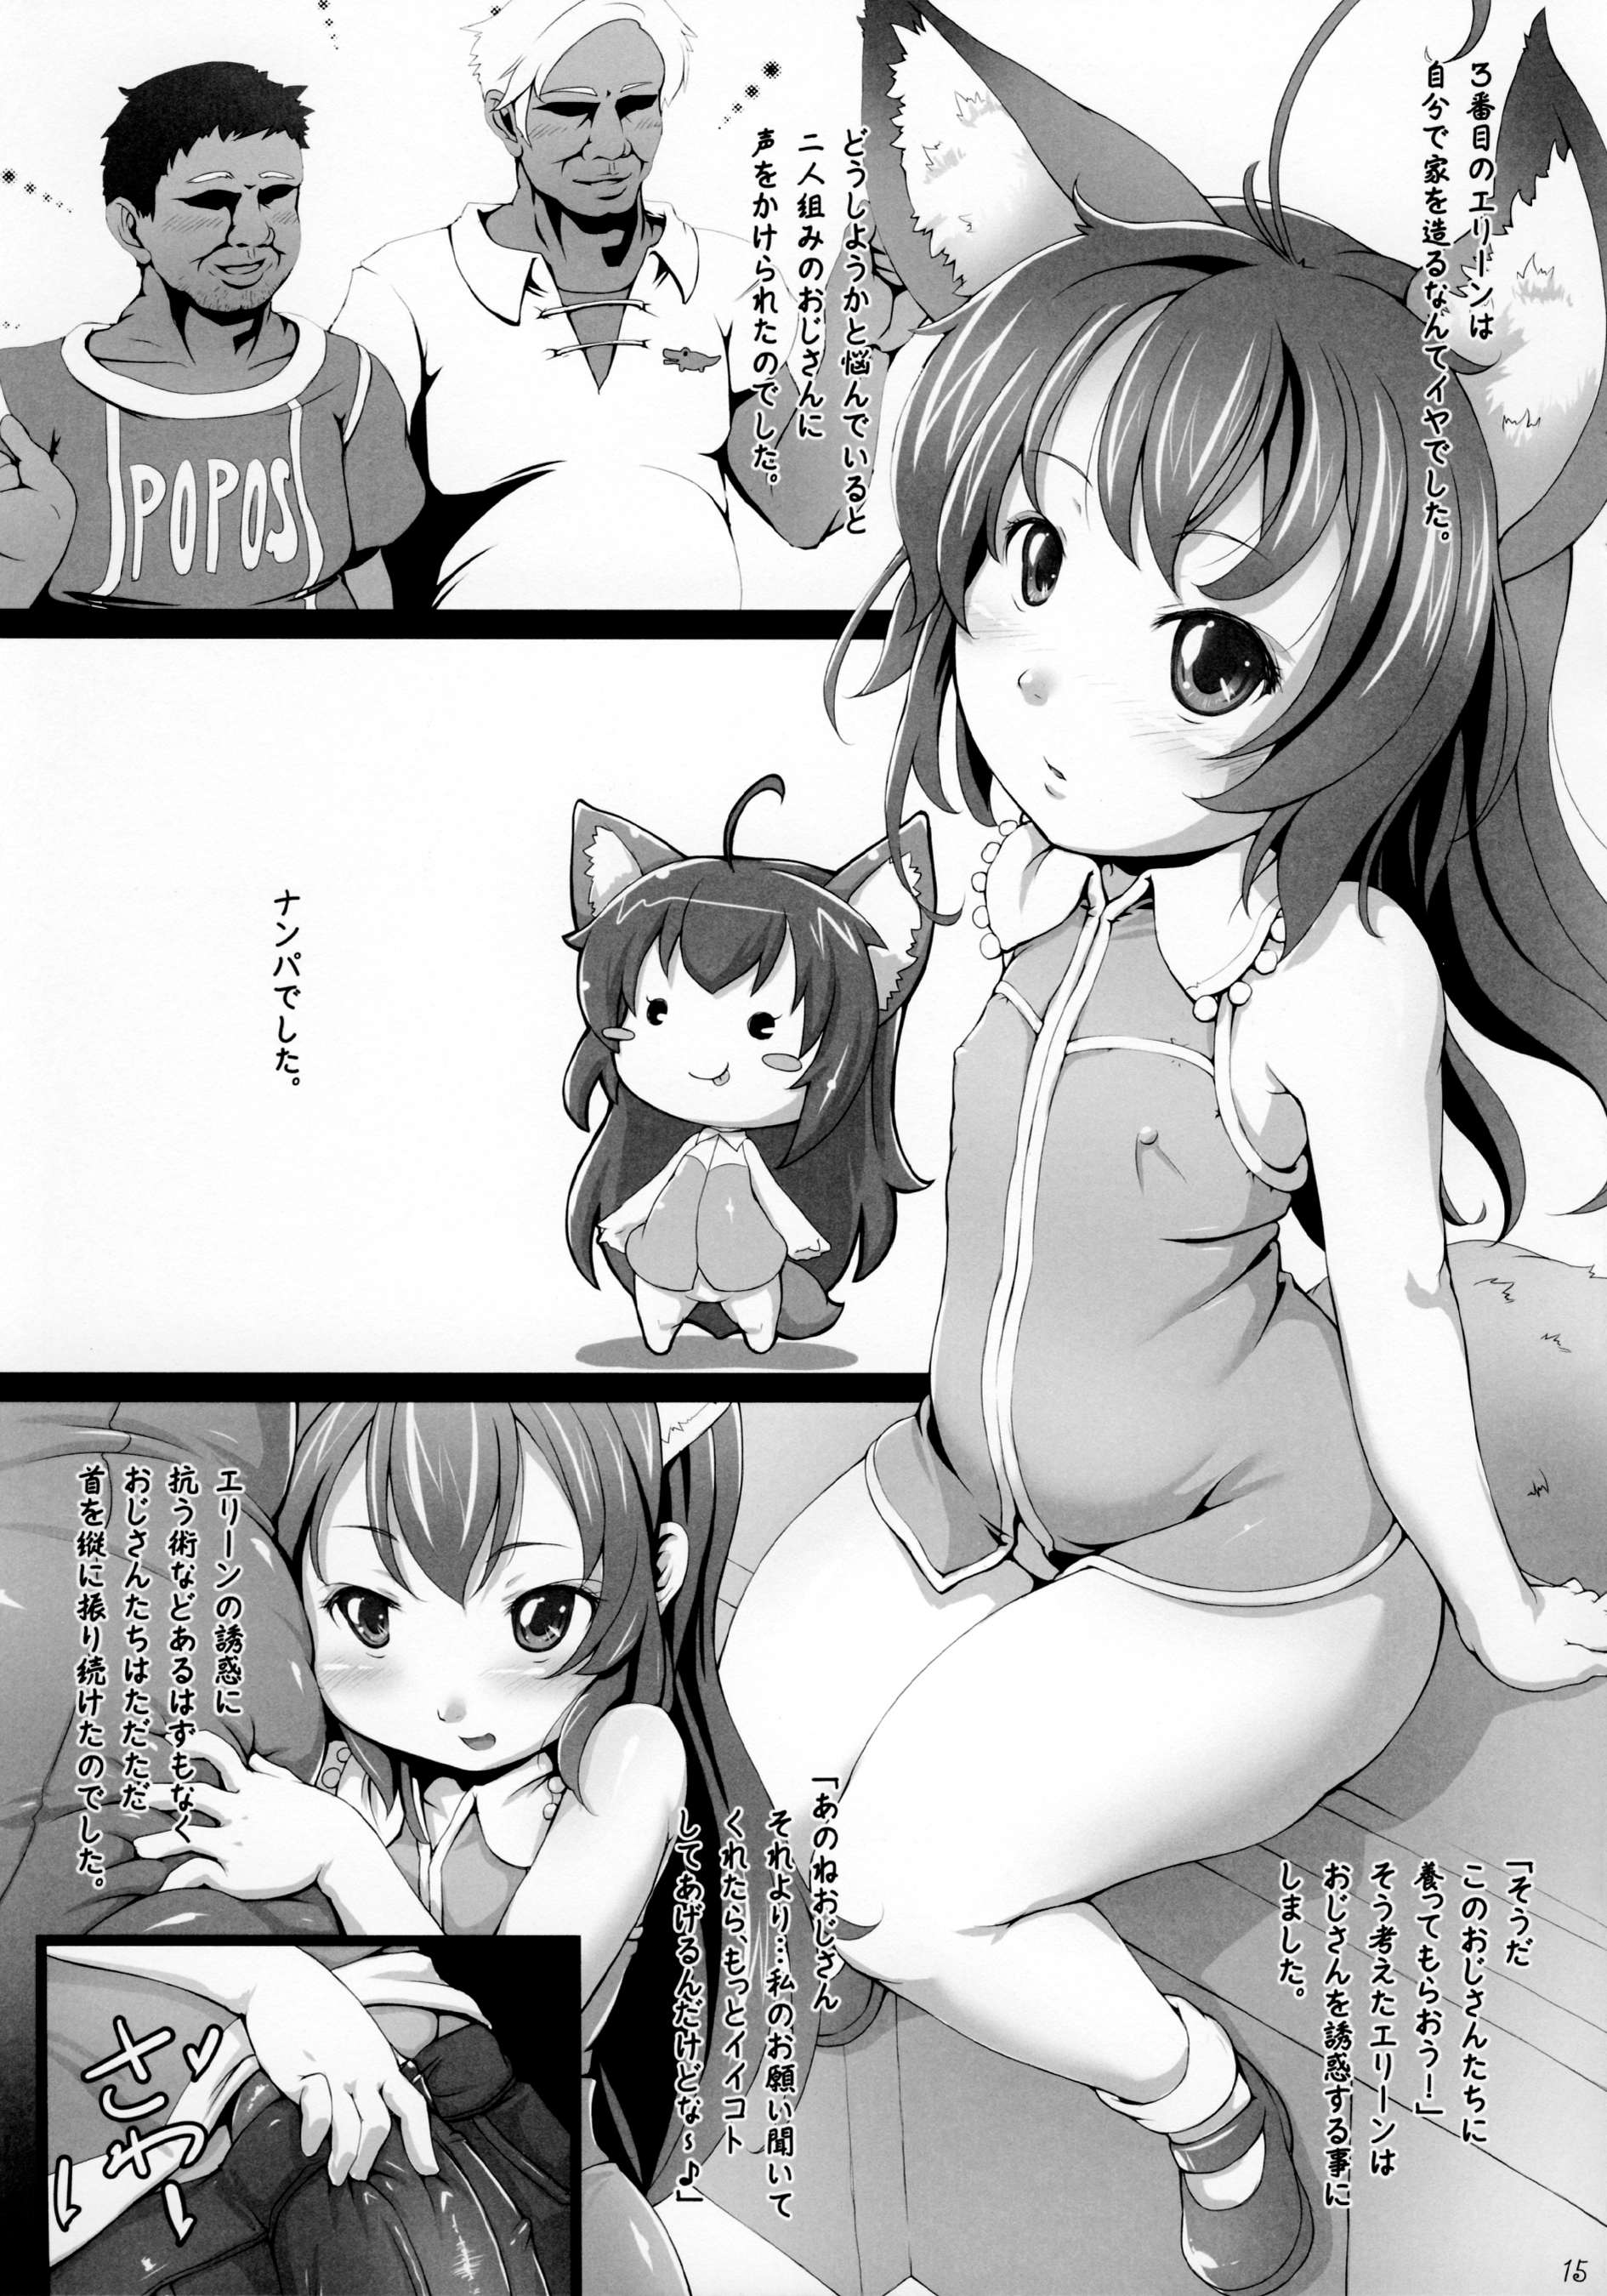 (C87) [Kitchen*Channel (きっちゃん)] The Three Little Elin (TERA The Exiled Realm of Arborea)